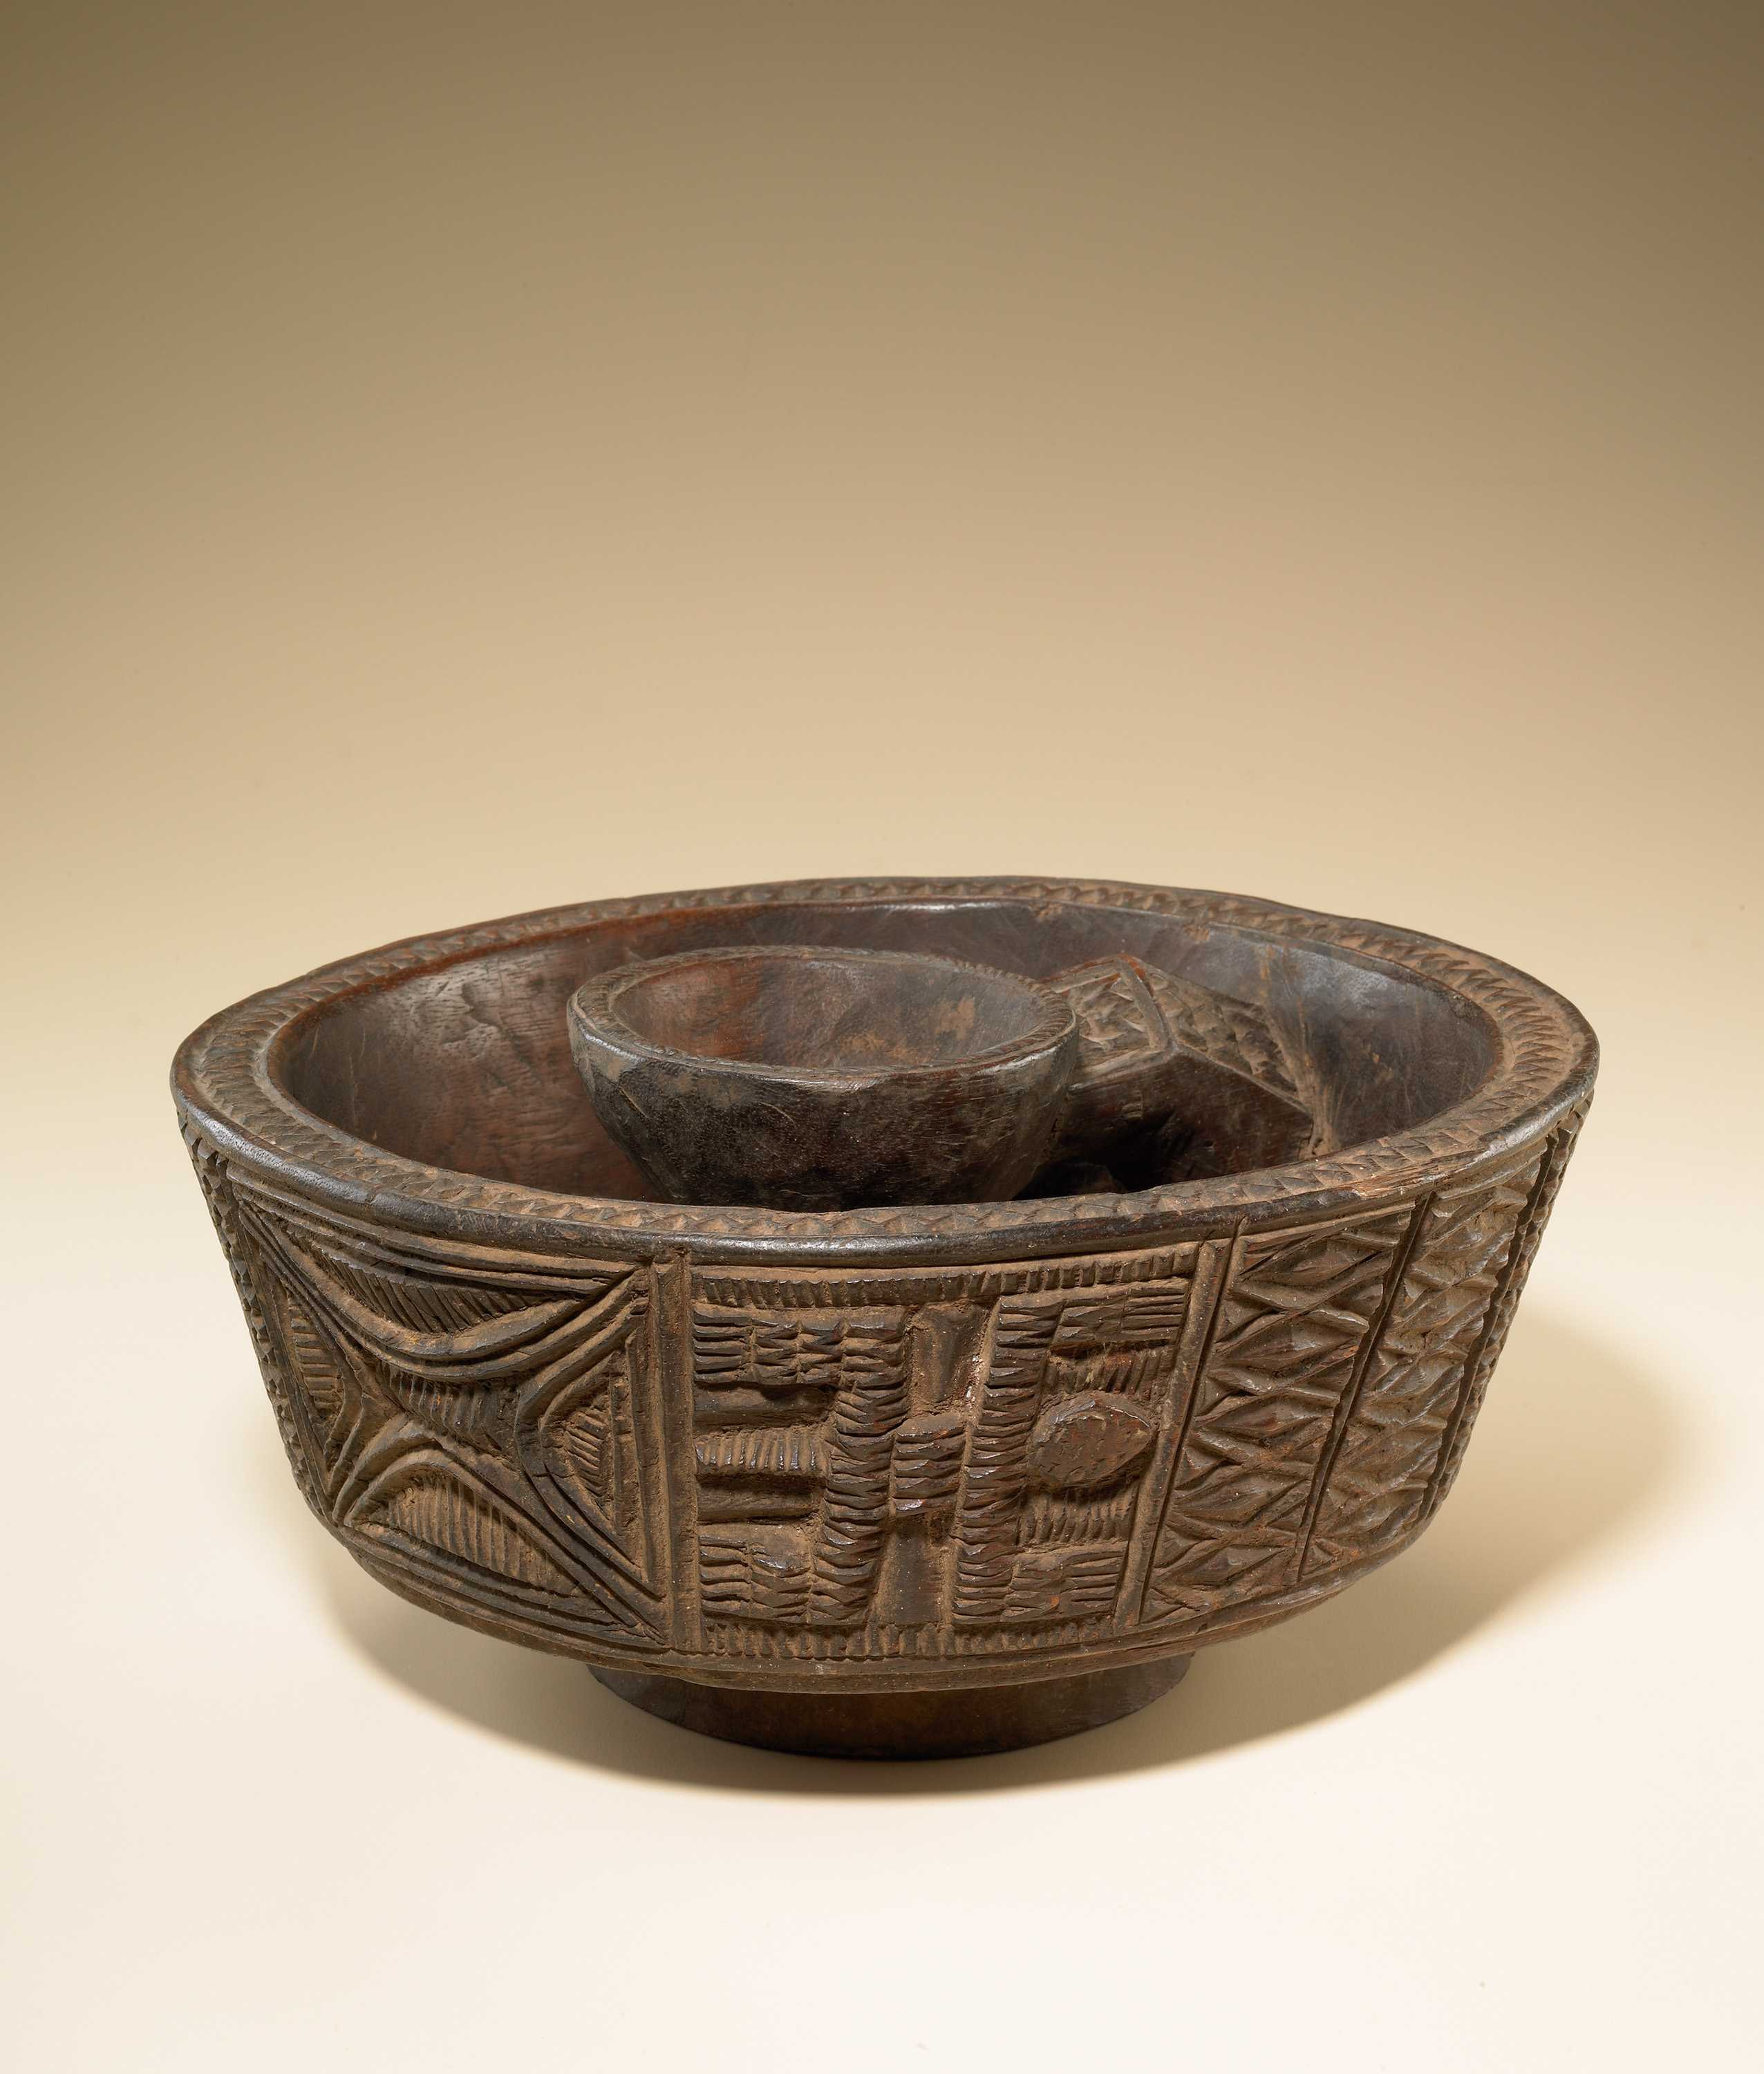 A dark wooden bowl carved with a geometric motifs and designs around the sides and edges of the bowl.